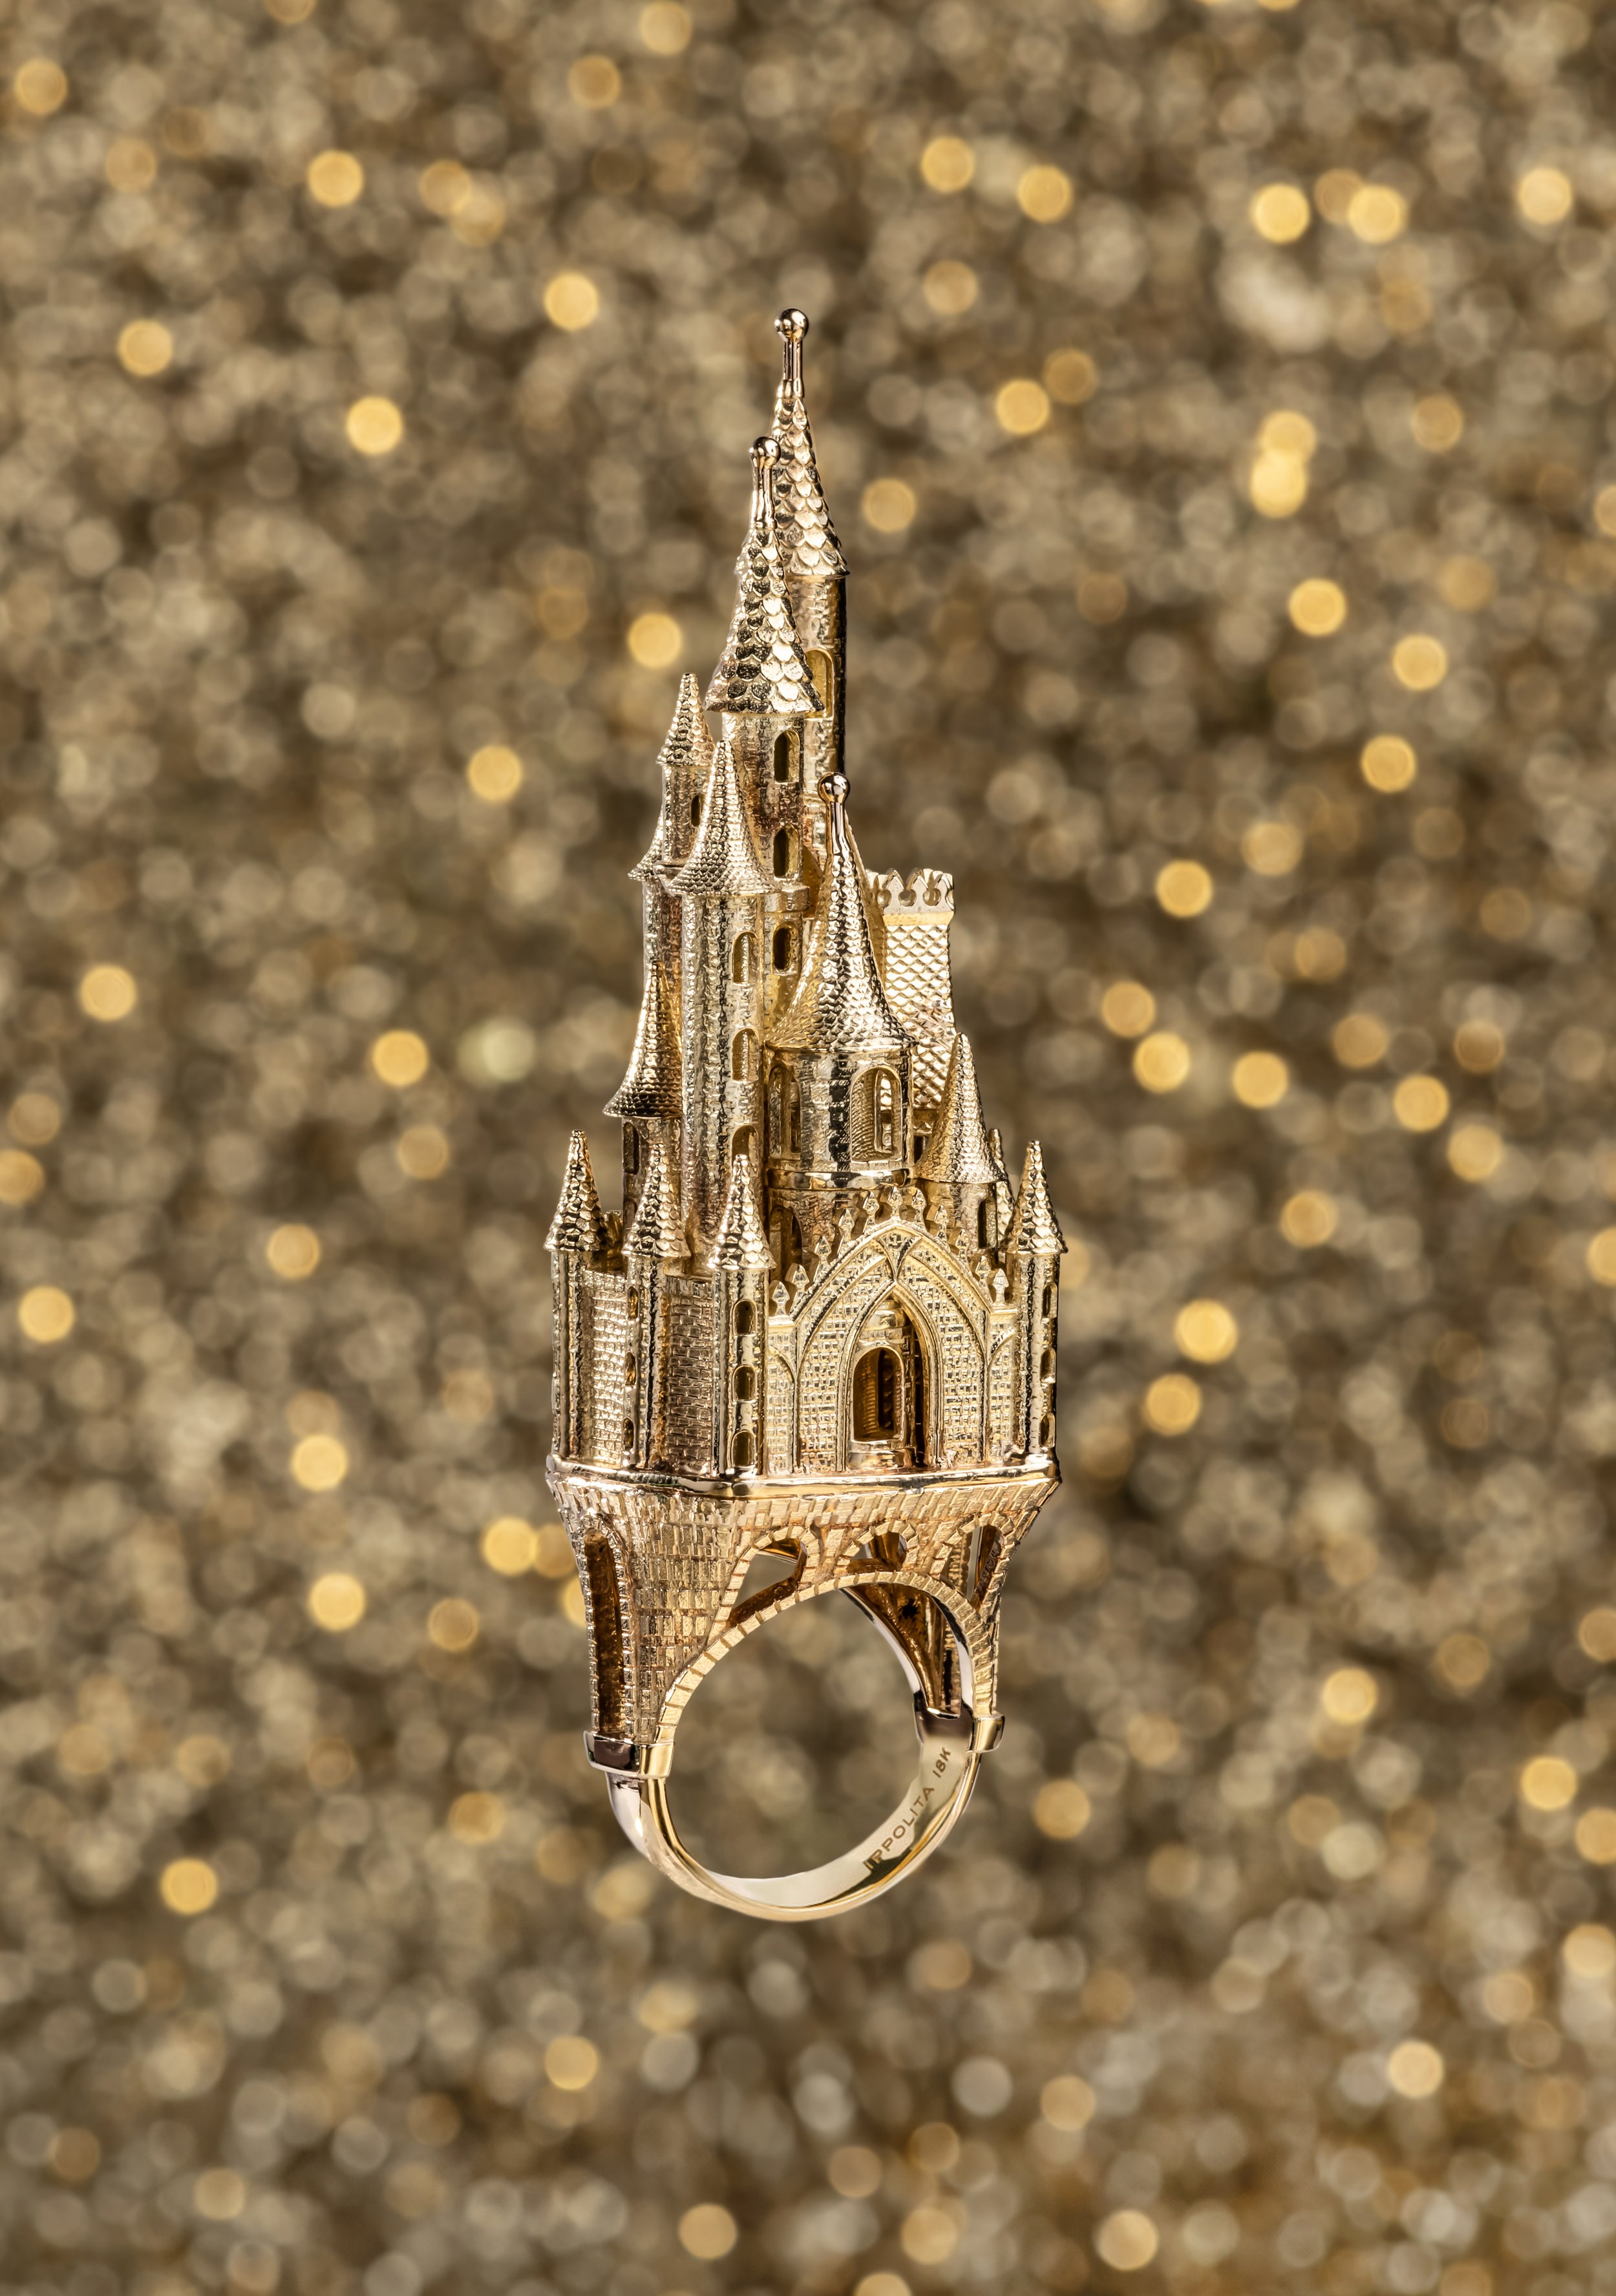 Ippolita Mini Castle and Towers Ring - photo by Andrew Werner .jpg